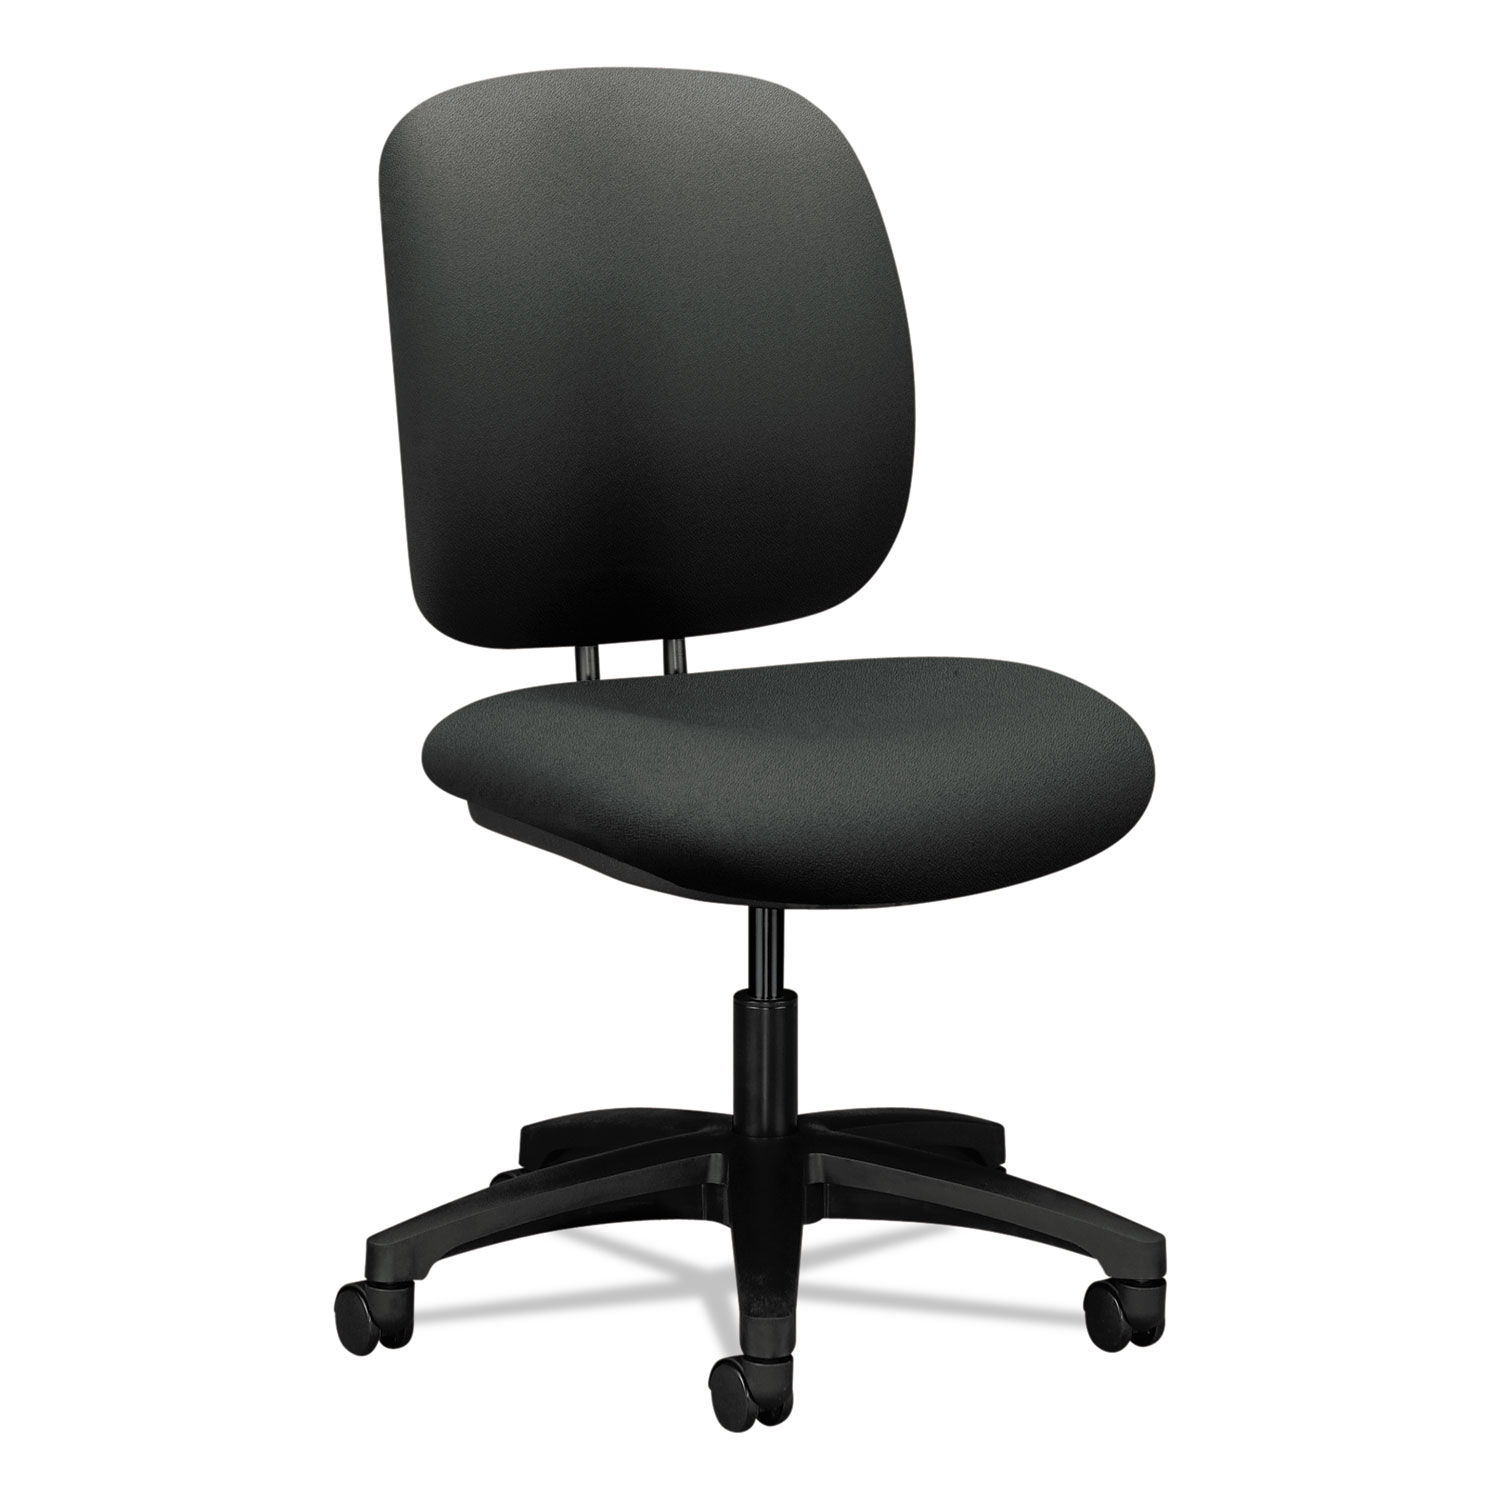  HON H5901.H.CU19.T ComforTask Task Swivel Chair, Supports up to 300 lbs., Iron Ore Seat, Iron Ore Back, Black Base (HON5901CU19T) 